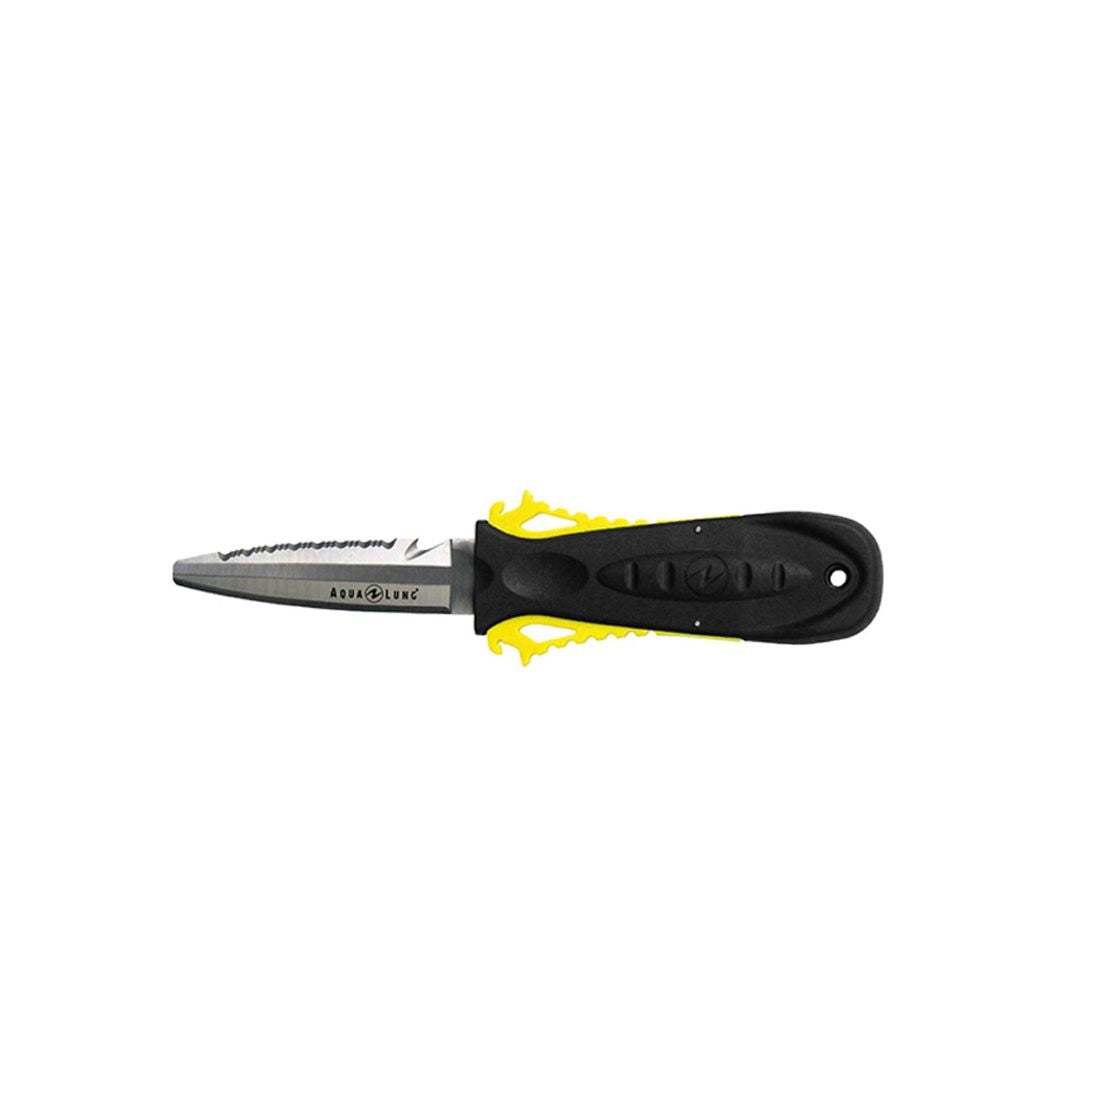 Akona dive knife for scuba diving, freediving or spearfishing